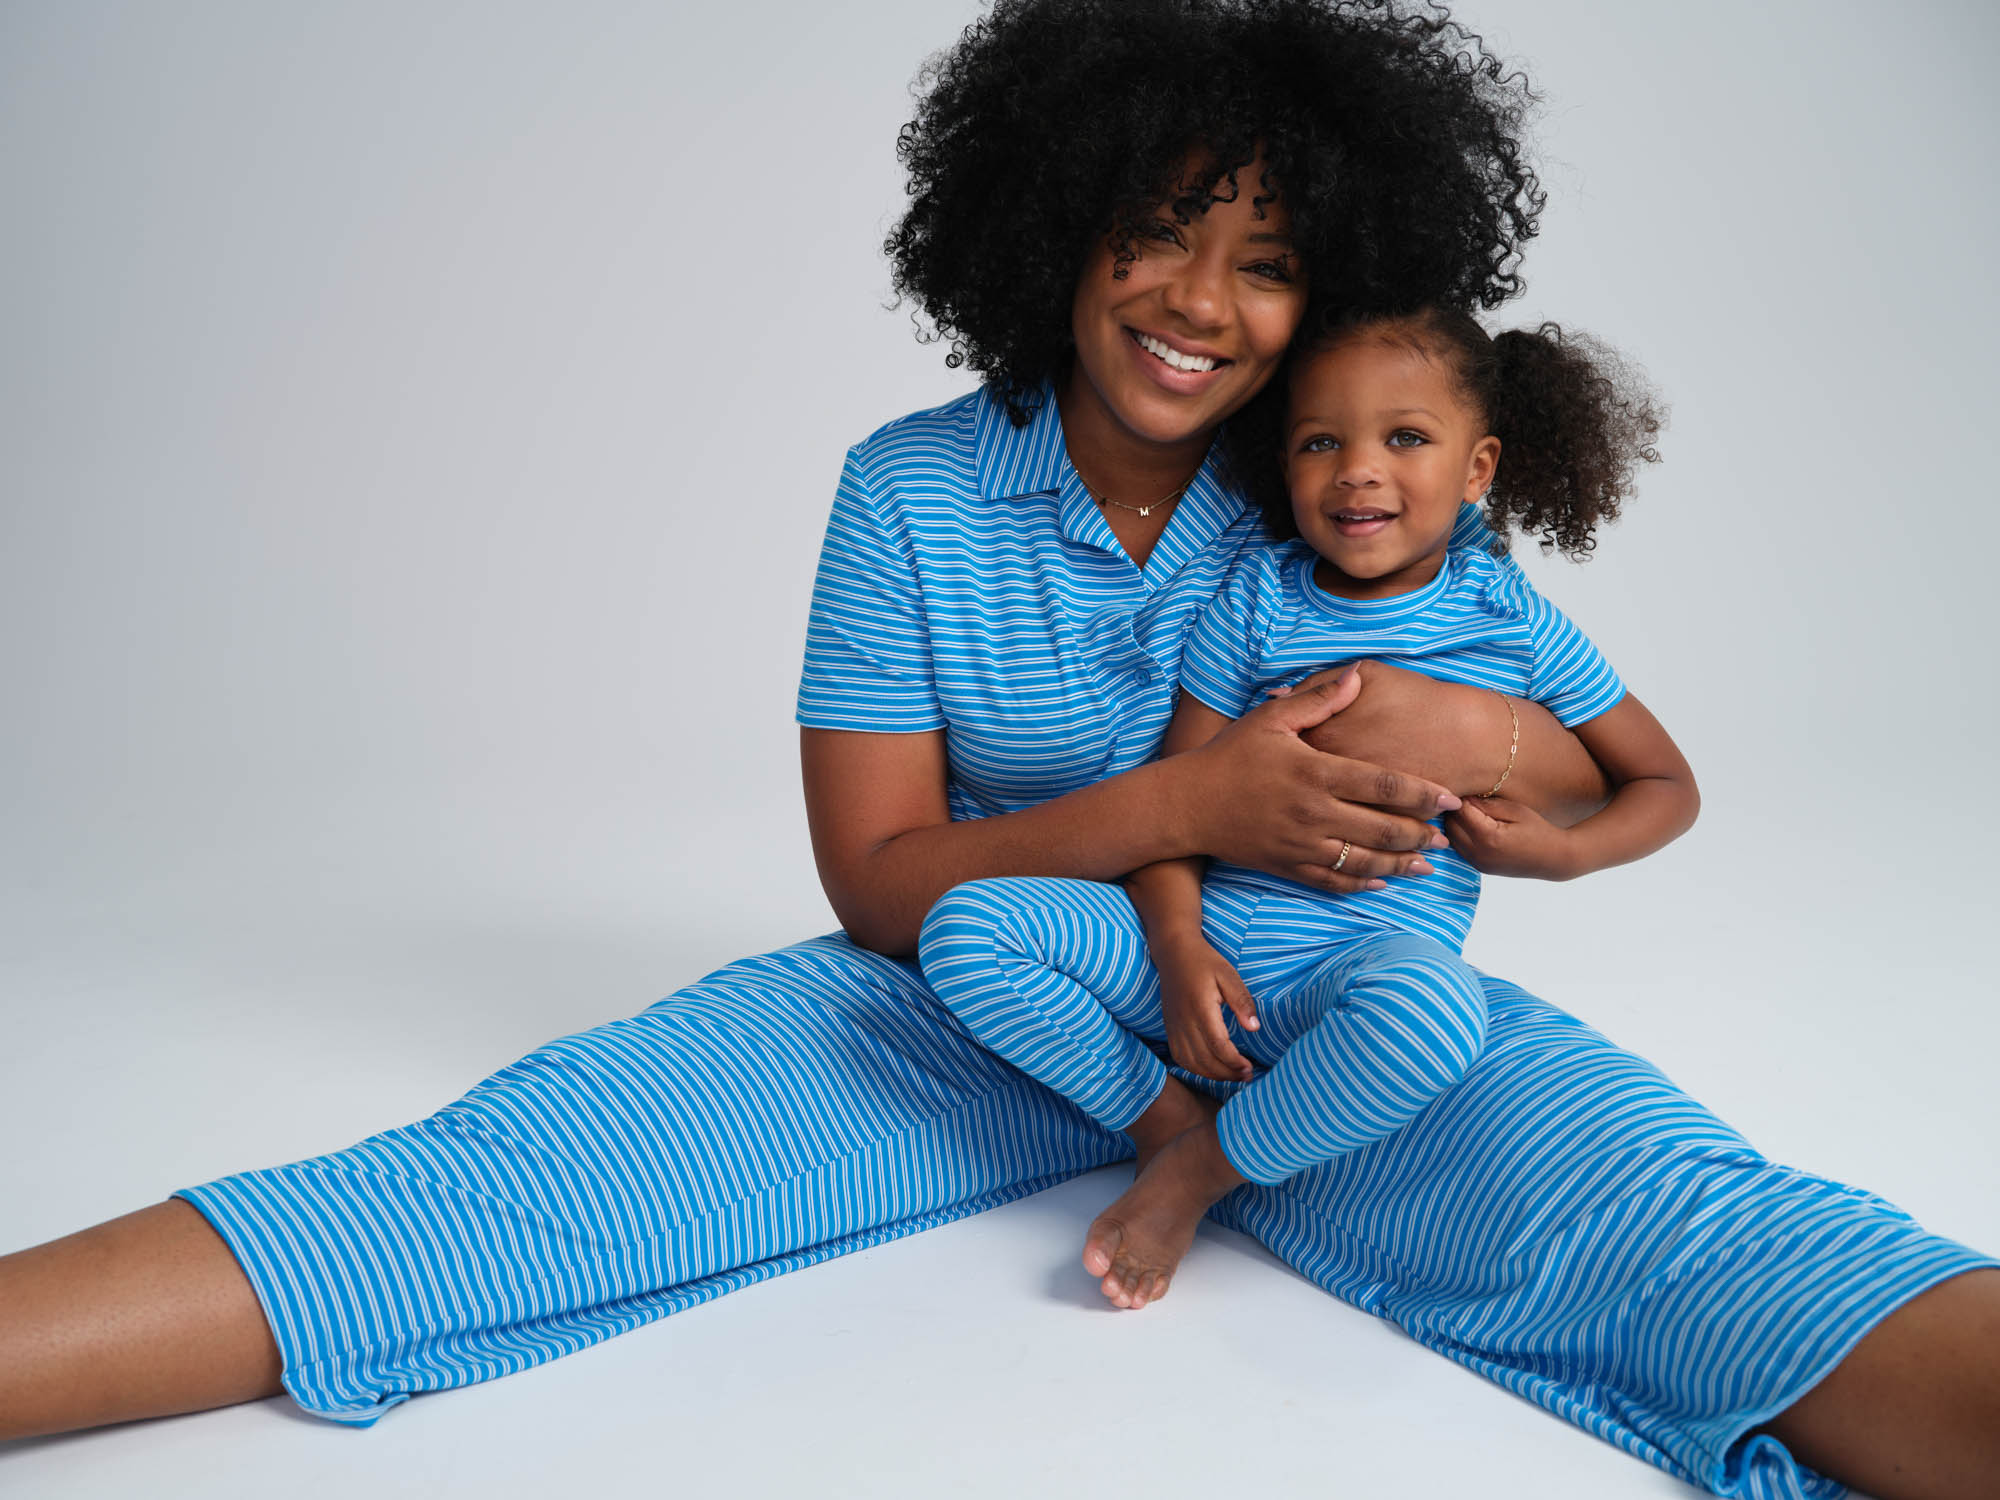 Soma women’s model and daughter wearing matching blue and white striped pajamas. 